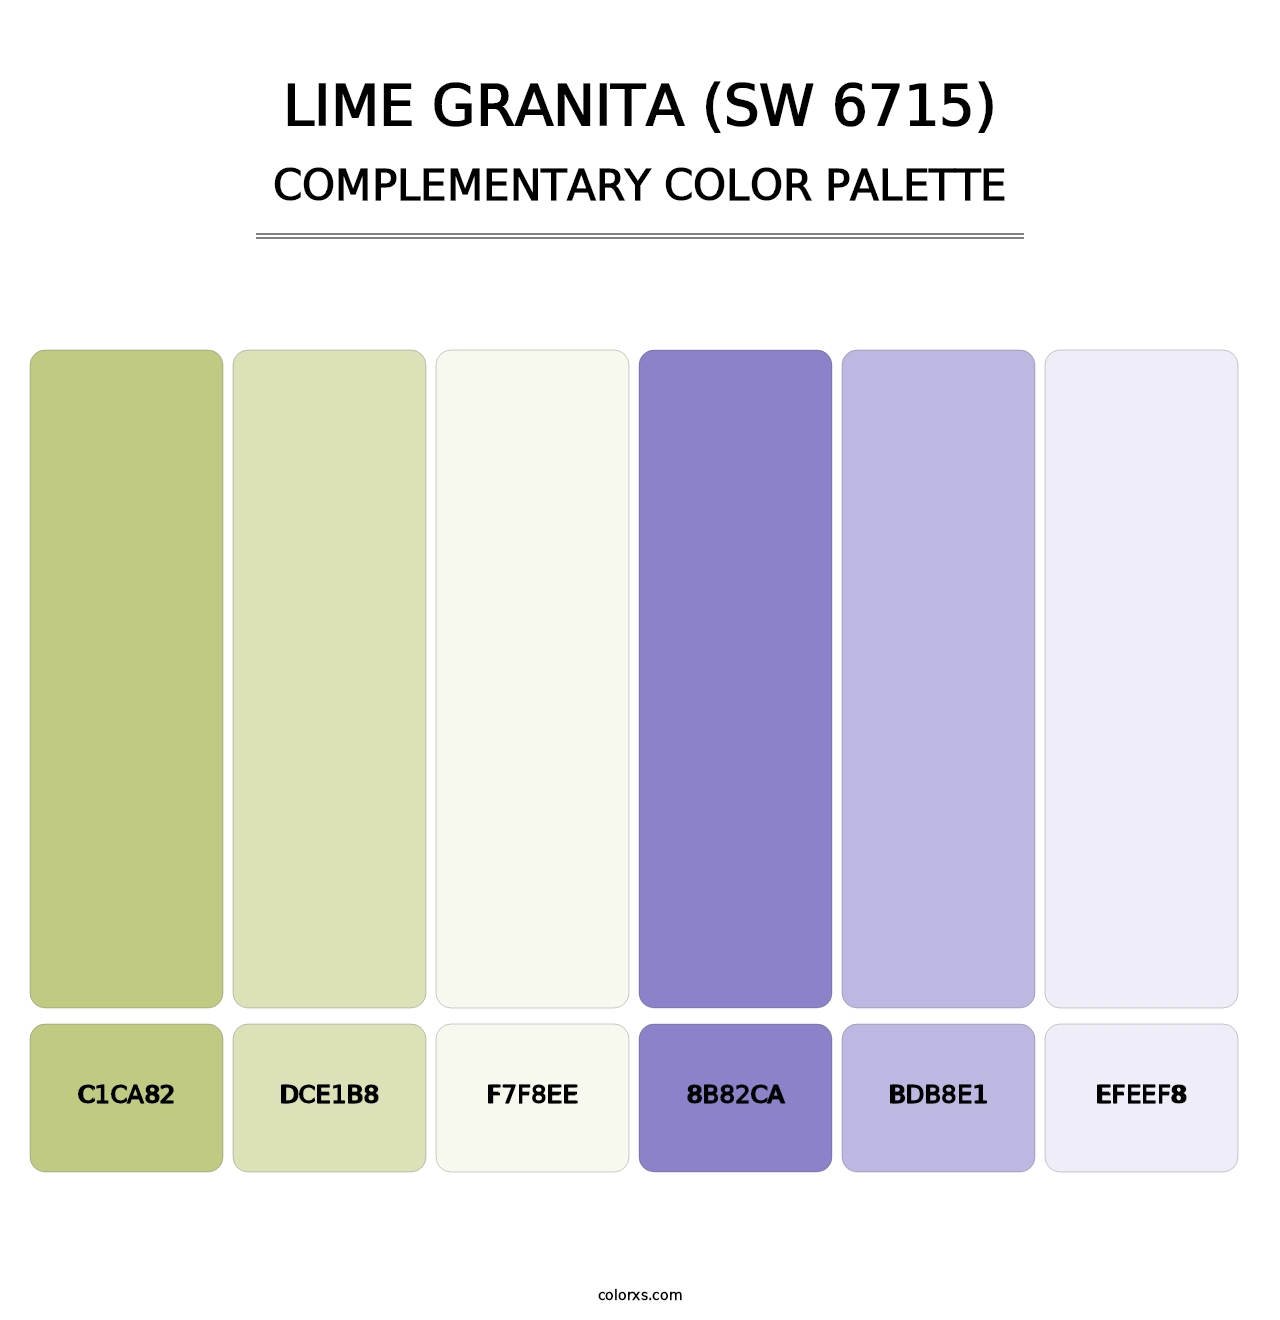 Lime Granita (SW 6715) - Complementary Color Palette